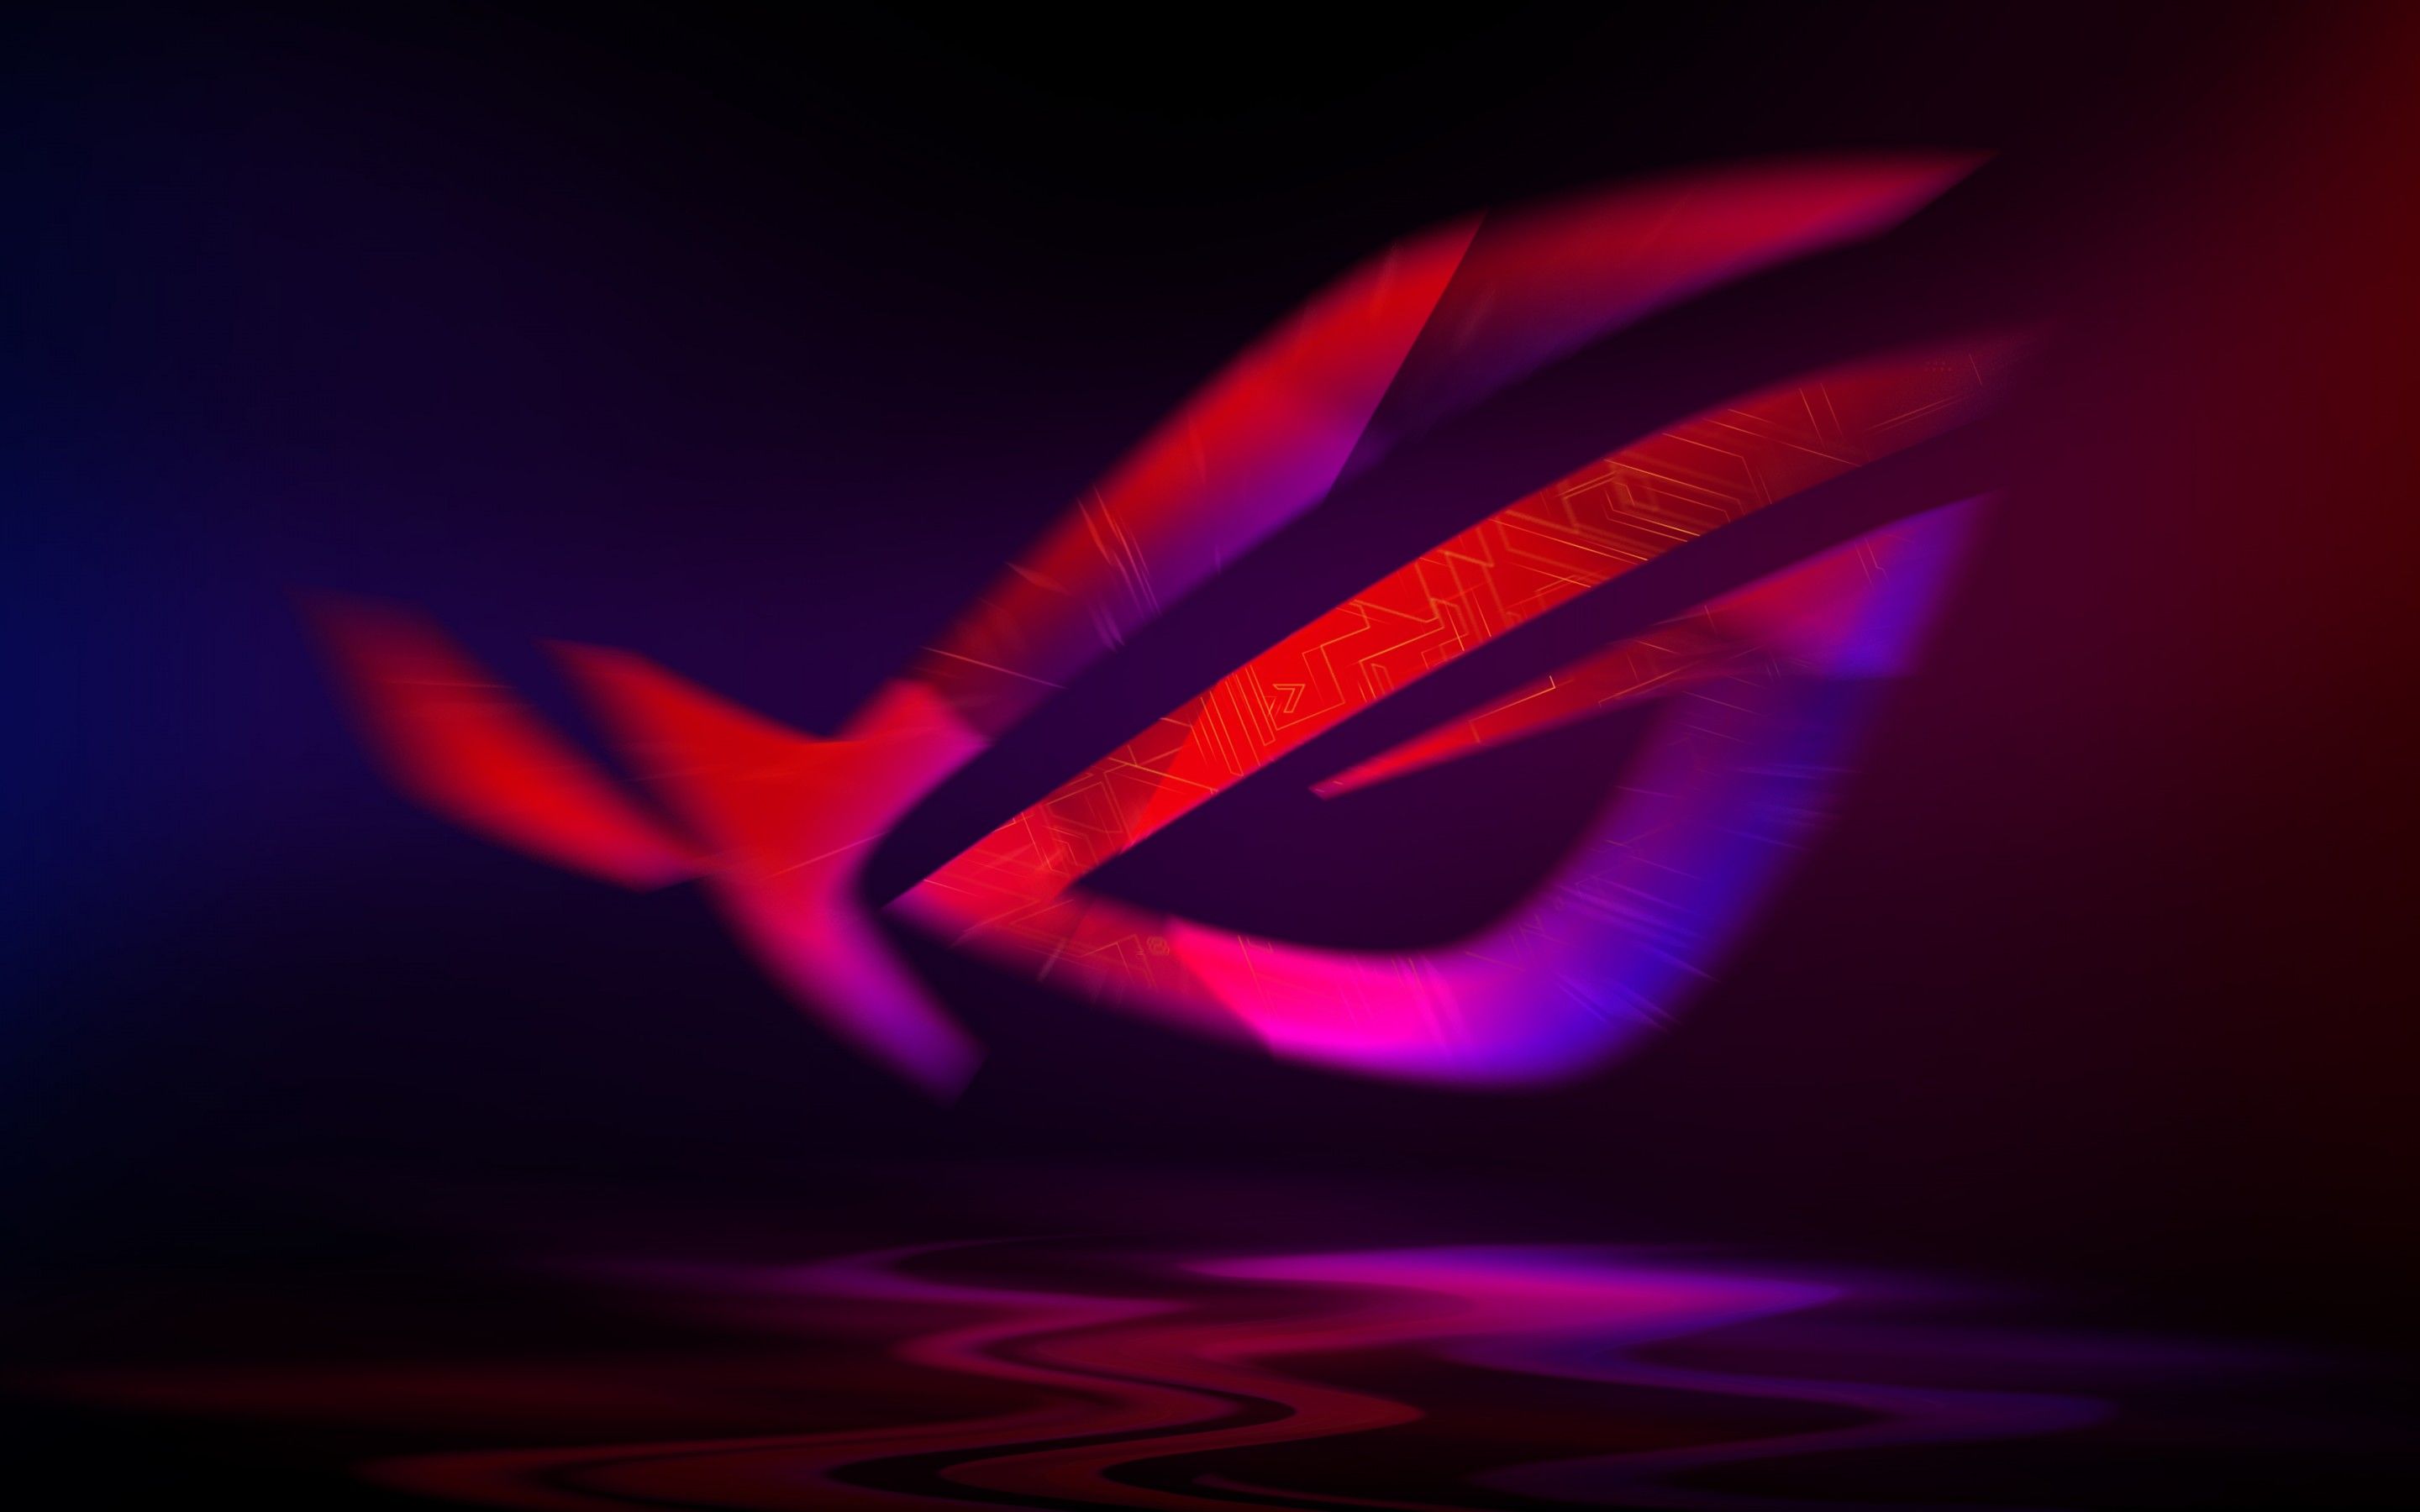 Wallpaper ASUS ROG, Neon, 4K, Technology,. Wallpaper for iPhone, Android, Mobile and Desktop